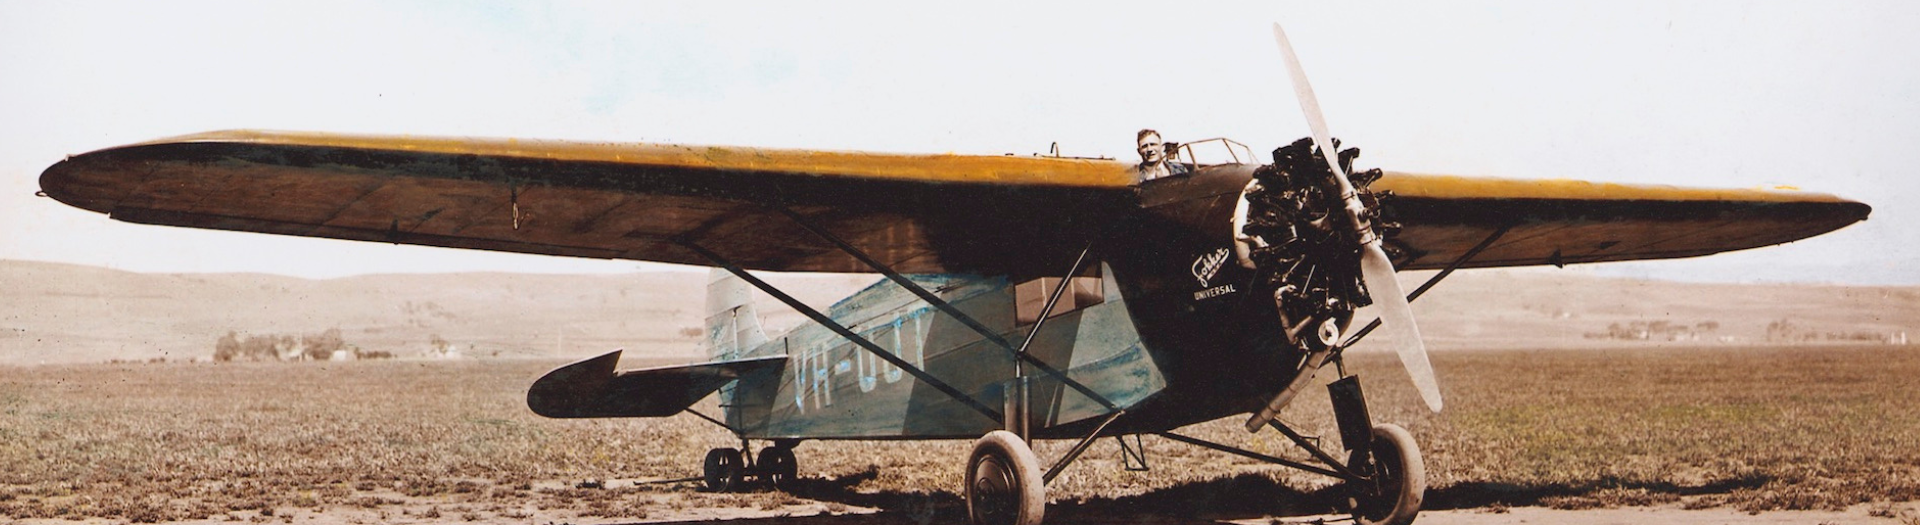 An old plane on the ground in a desert. A man is poking his head out from the cockpit and can be seen behind the wings of the plane